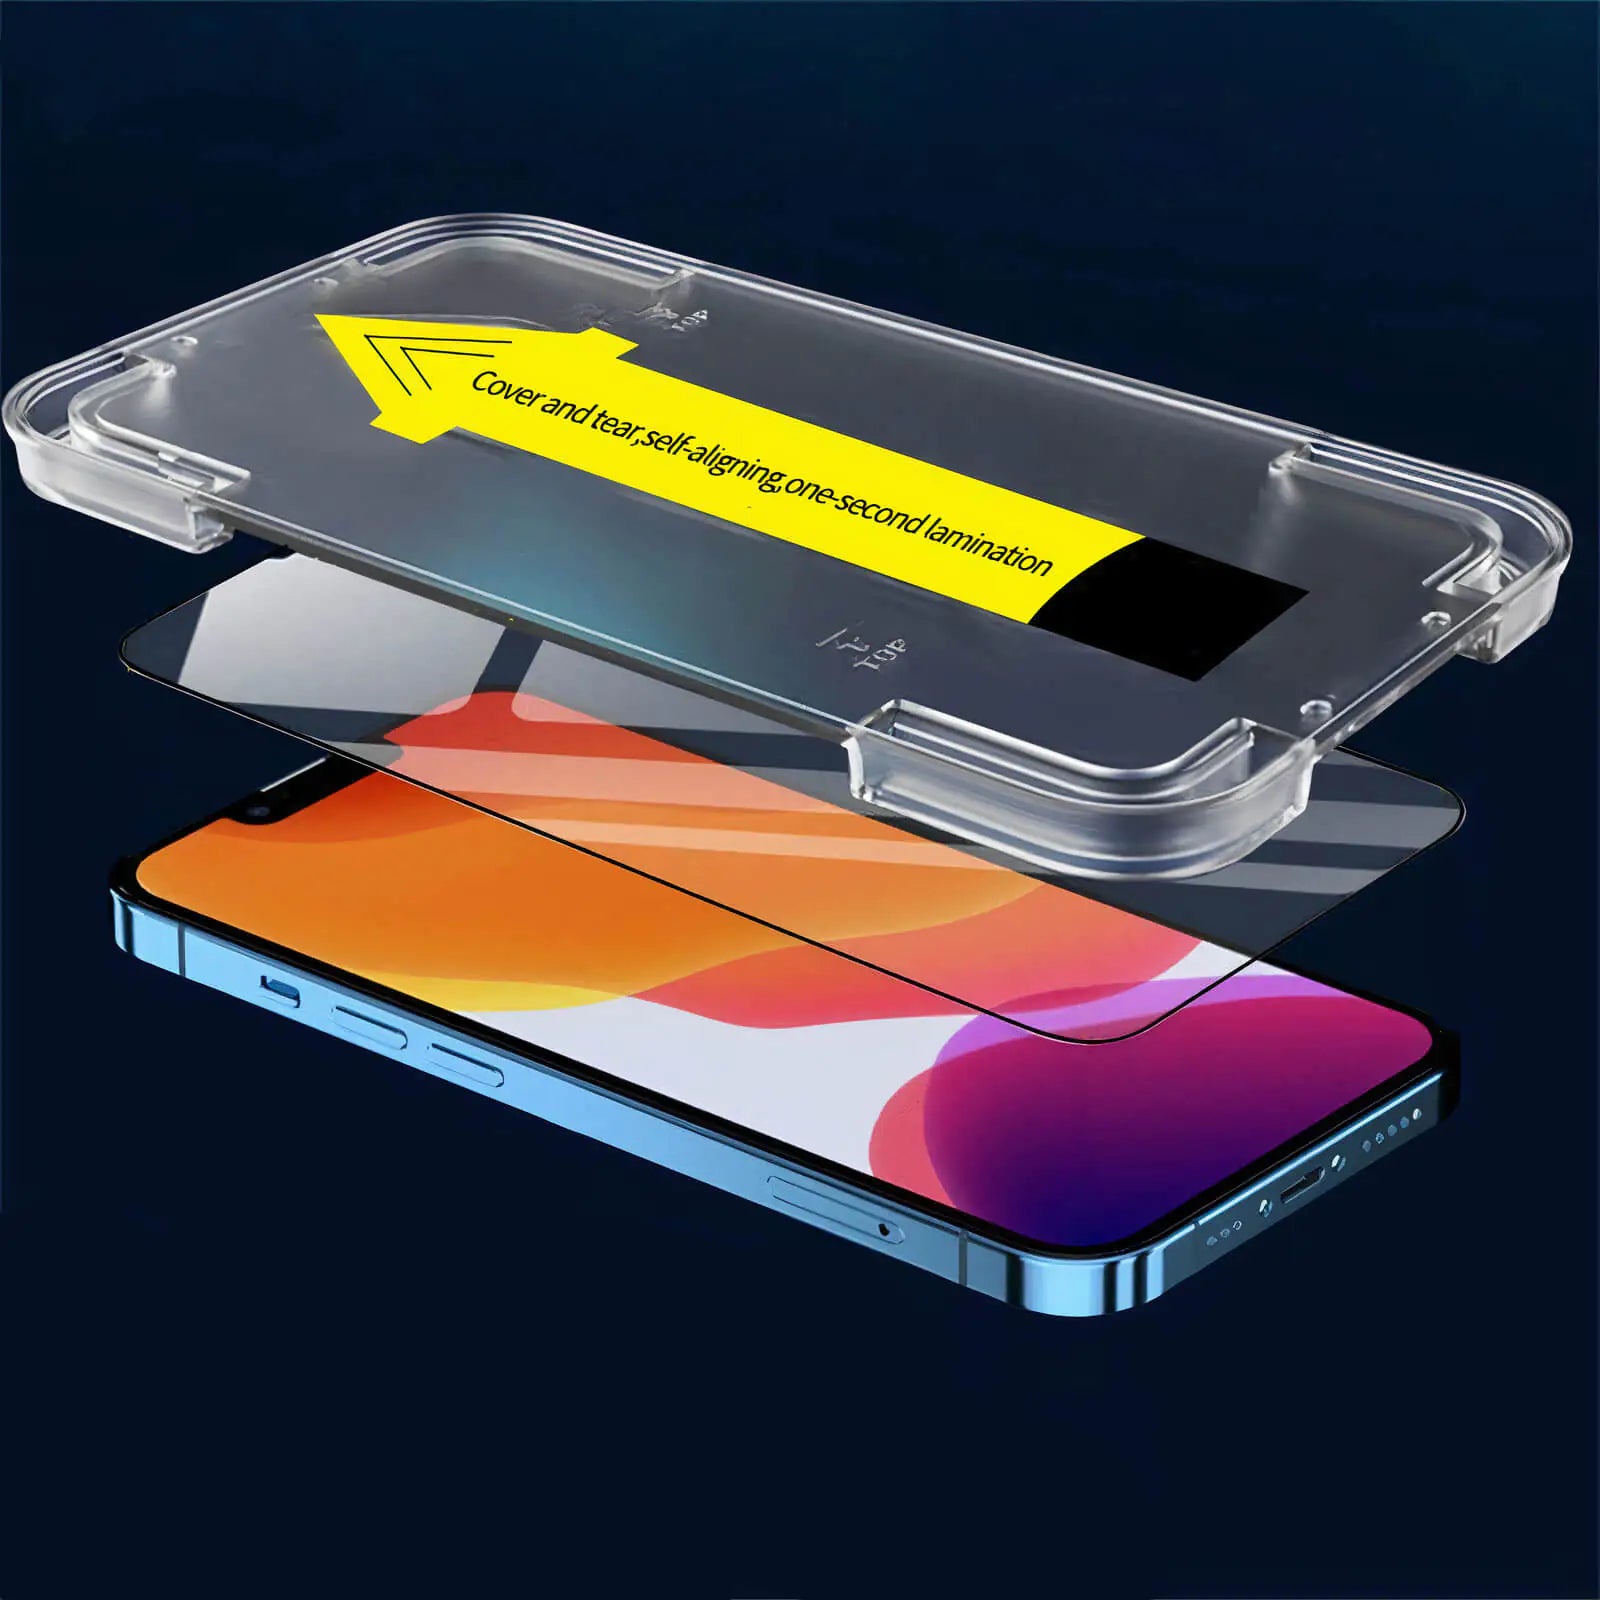 📱 Screen Protector Full-Coverage Tempered Glass Screen Protector High Scratch Resistance, Oil-Resistant, Reinforced Edges, Easy Install